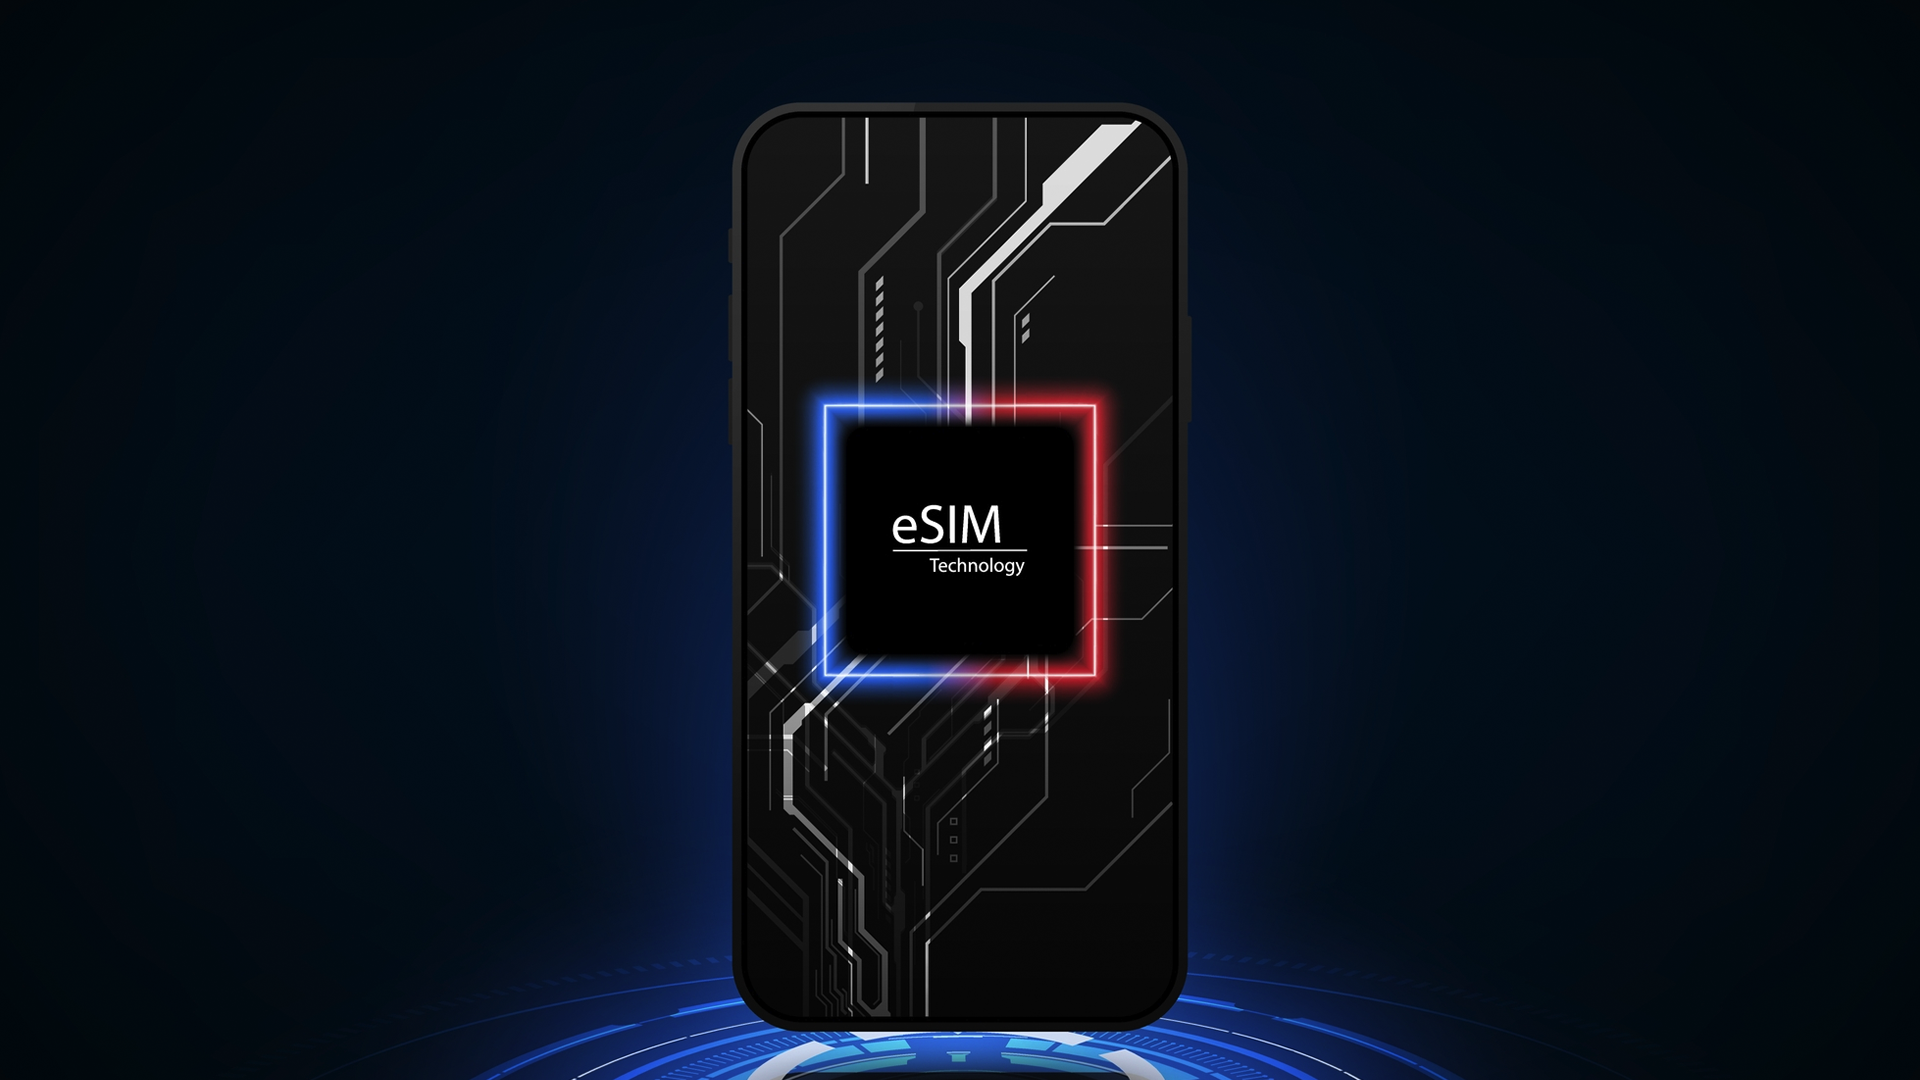 Image of a phone with an eSIM logo in the middle.